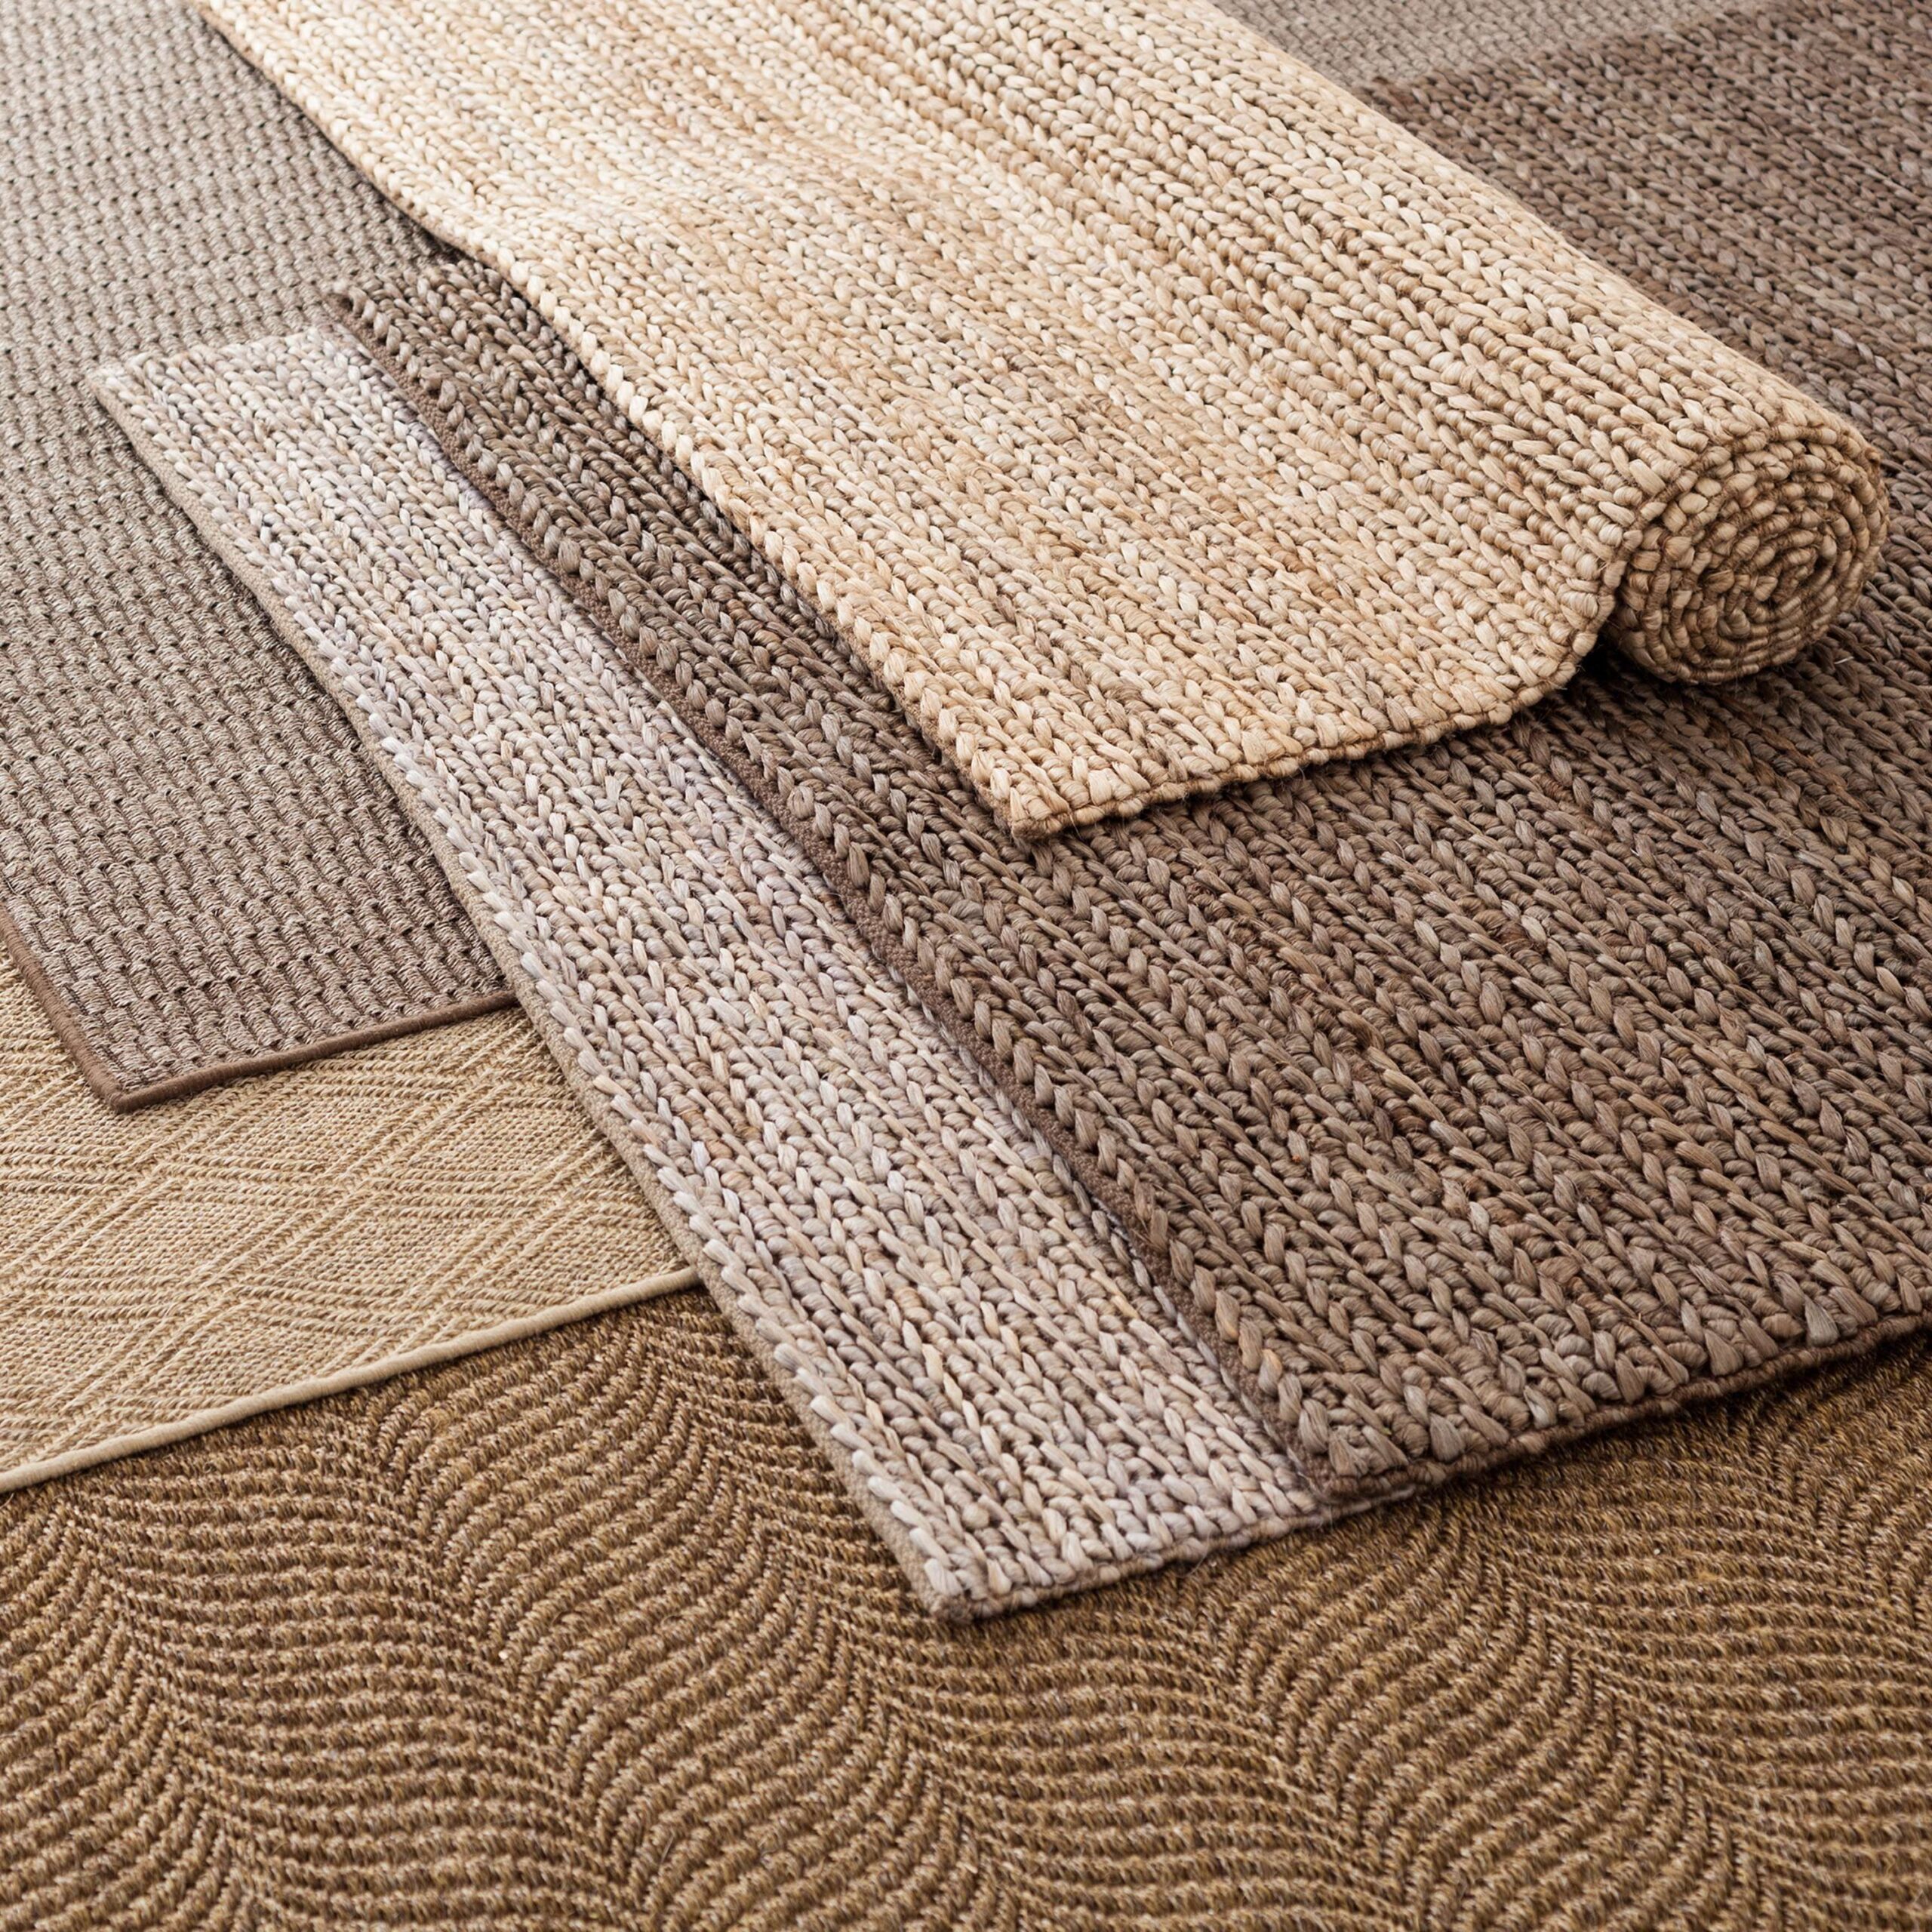 The practical uses of a sisal rug